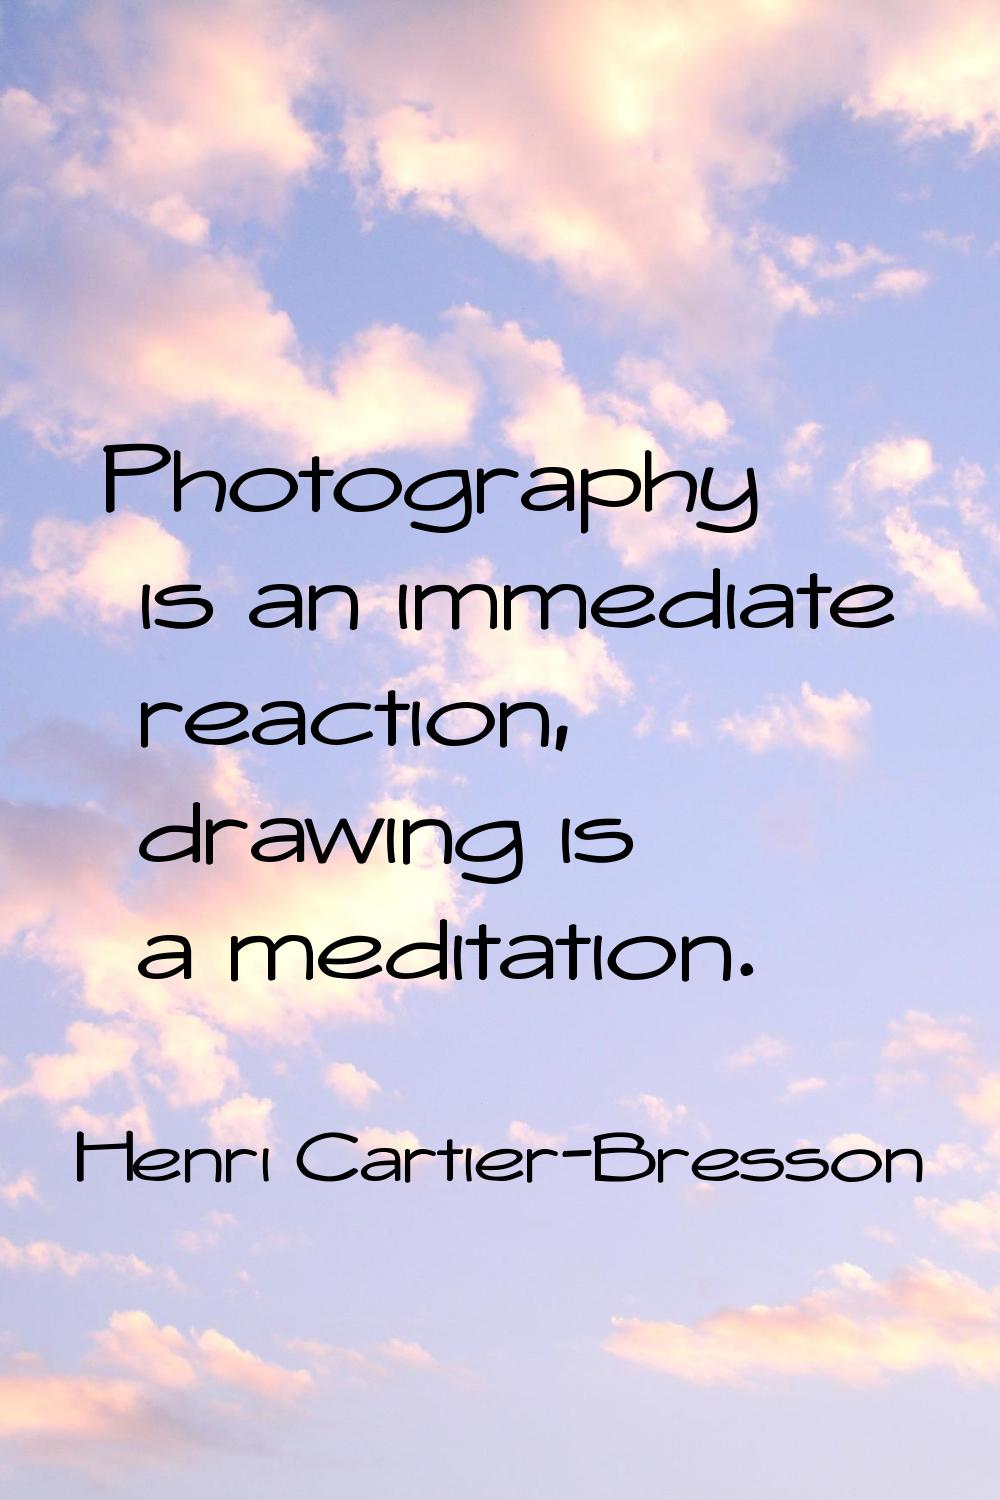 Photography is an immediate reaction, drawing is a meditation.